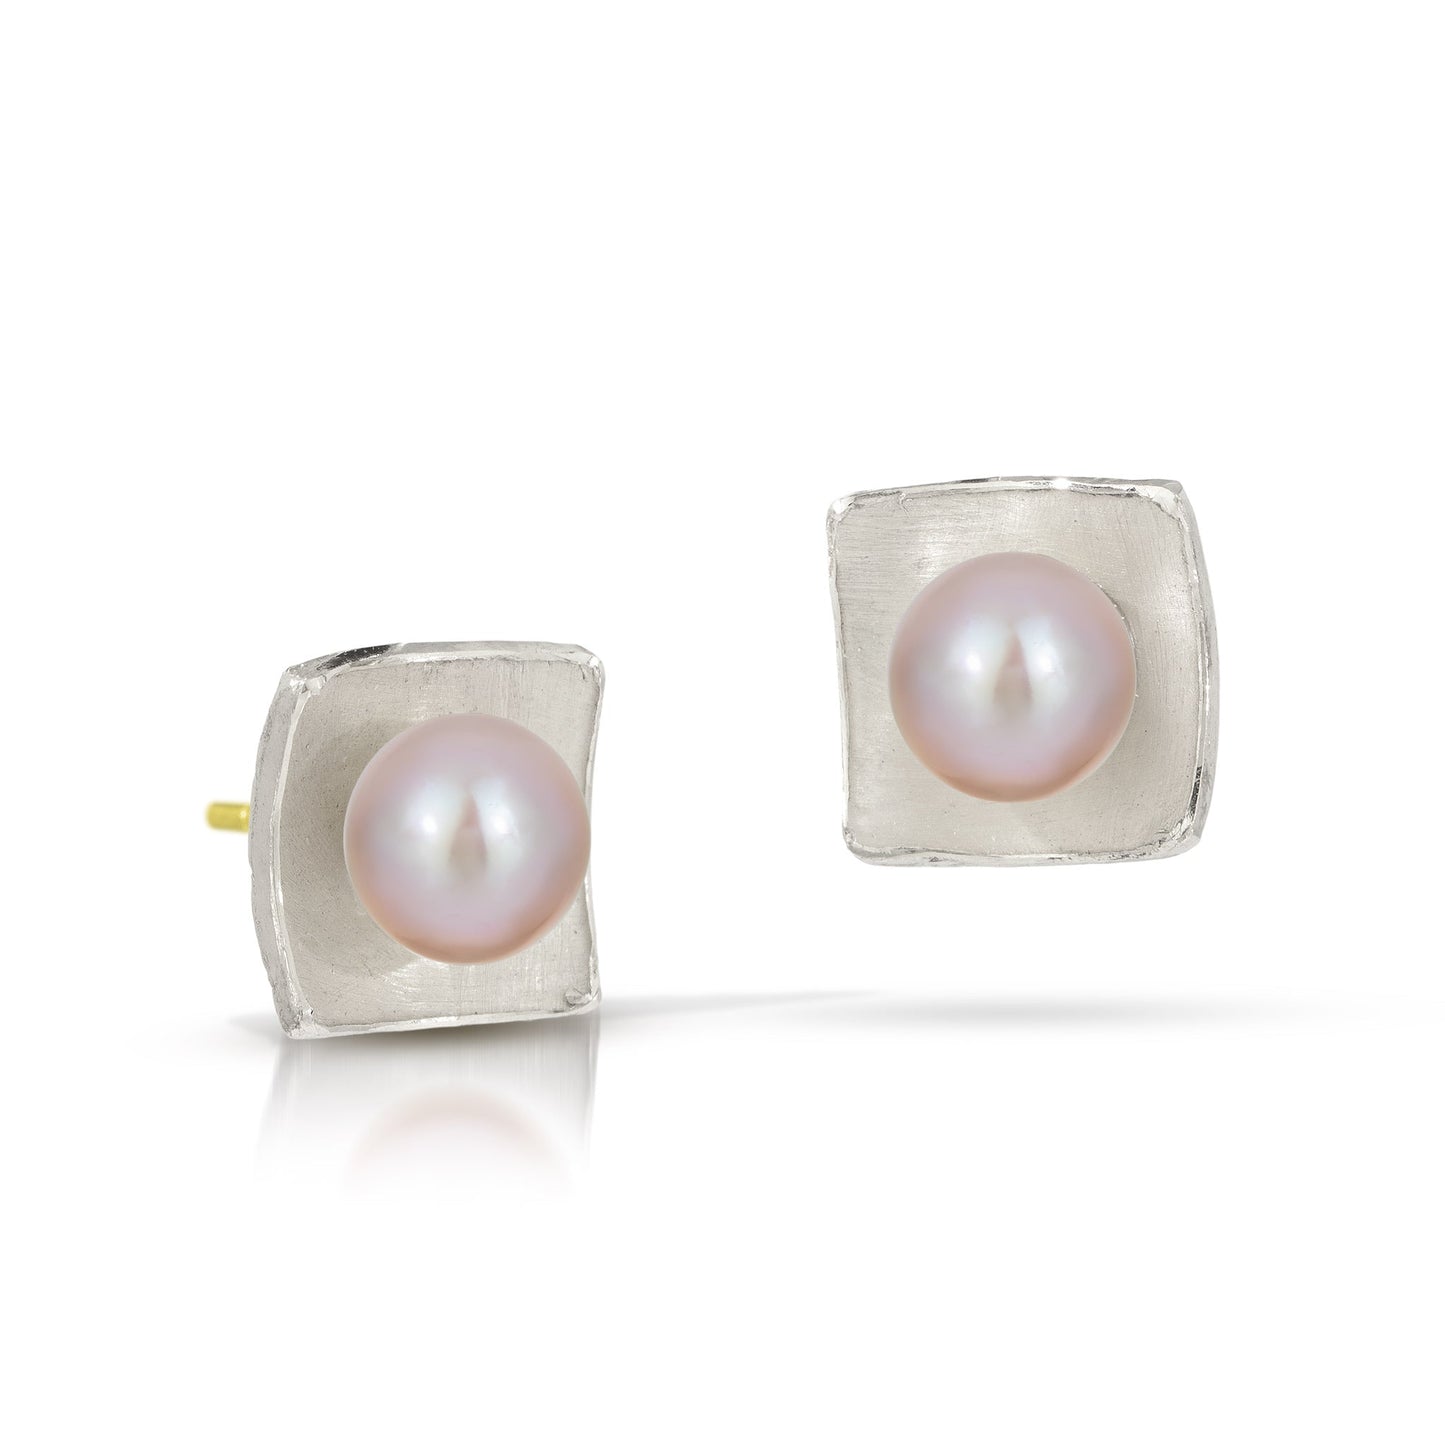 Silver Concave Square with Natural Pearl Earrings